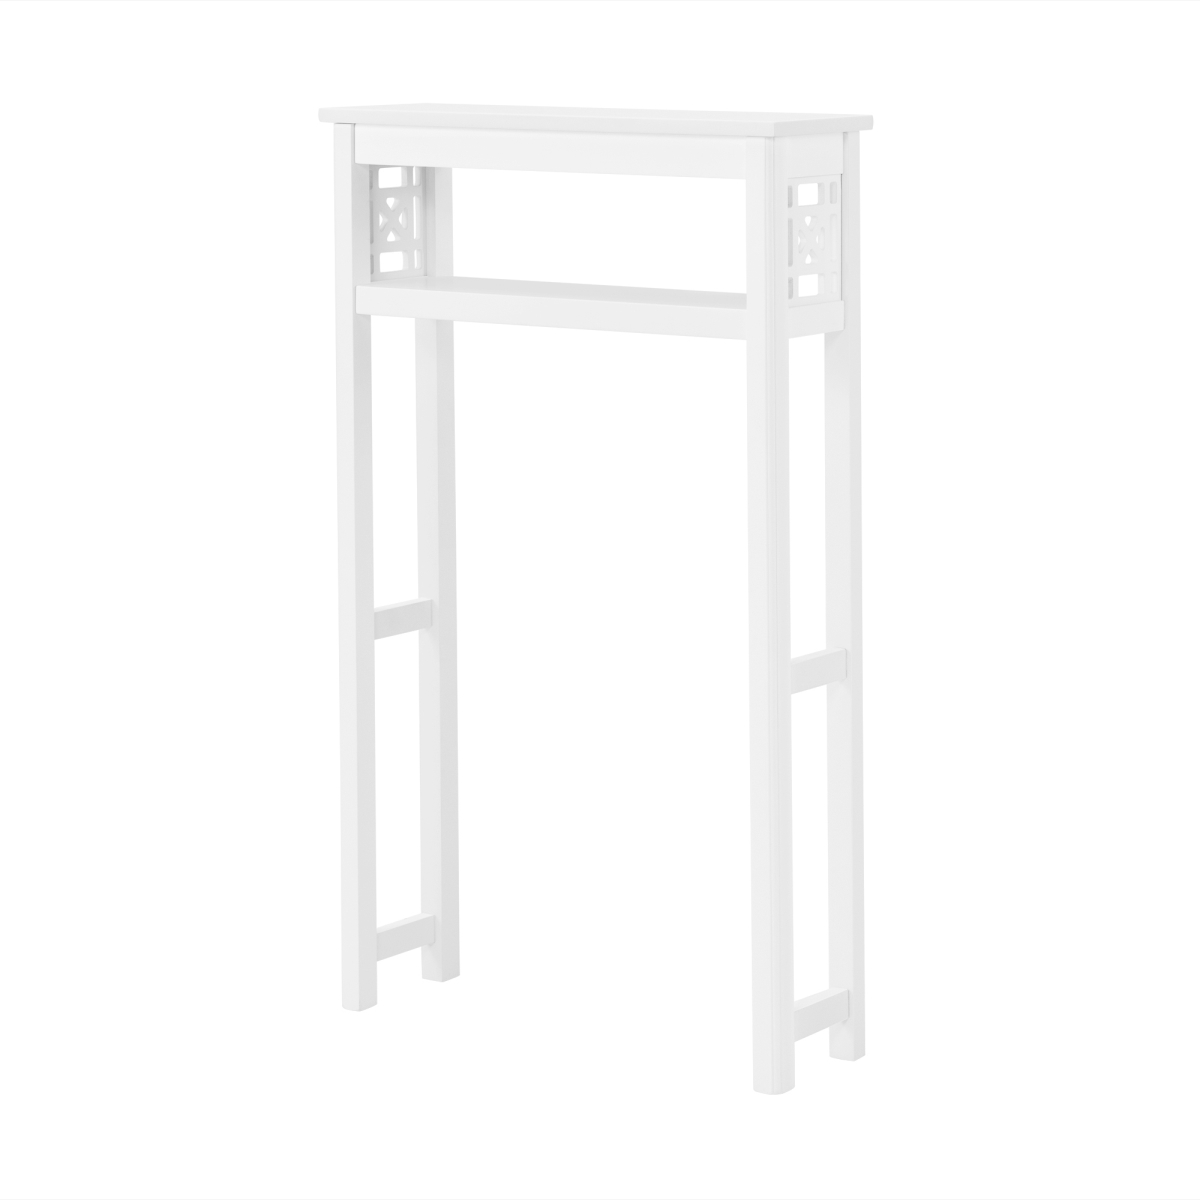 Picture of Alaterre ANDE73WH 27 x 44 in. Derby Over Toilet Open Storage Shelf